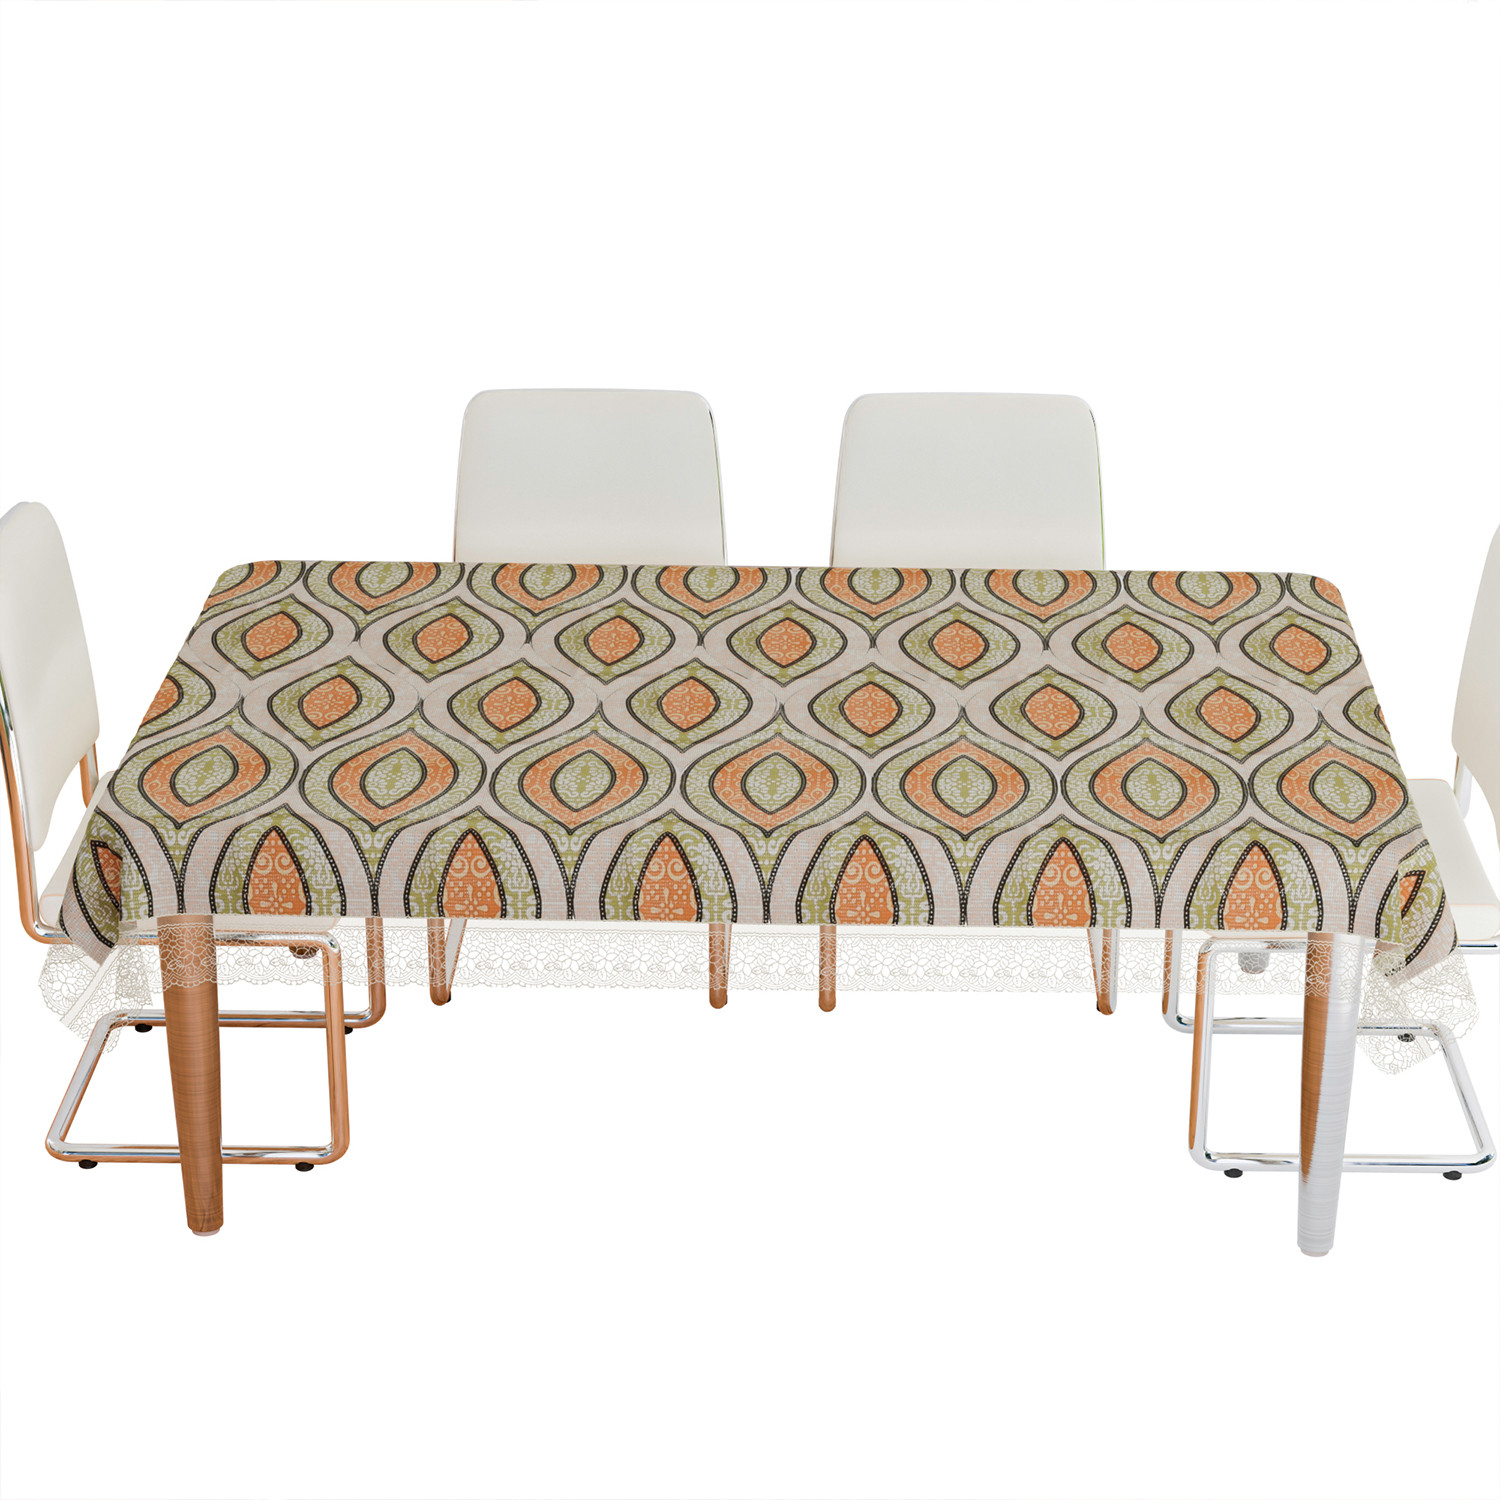 Kuber Industries Dining Table Cover | PVC Table Cloth Cover | 6 Seater Table Cloth | Zig Zag Gripper Table Cover | Table Protector | Table Cover for Dining Table | 60x90 Inch | DTC | Green